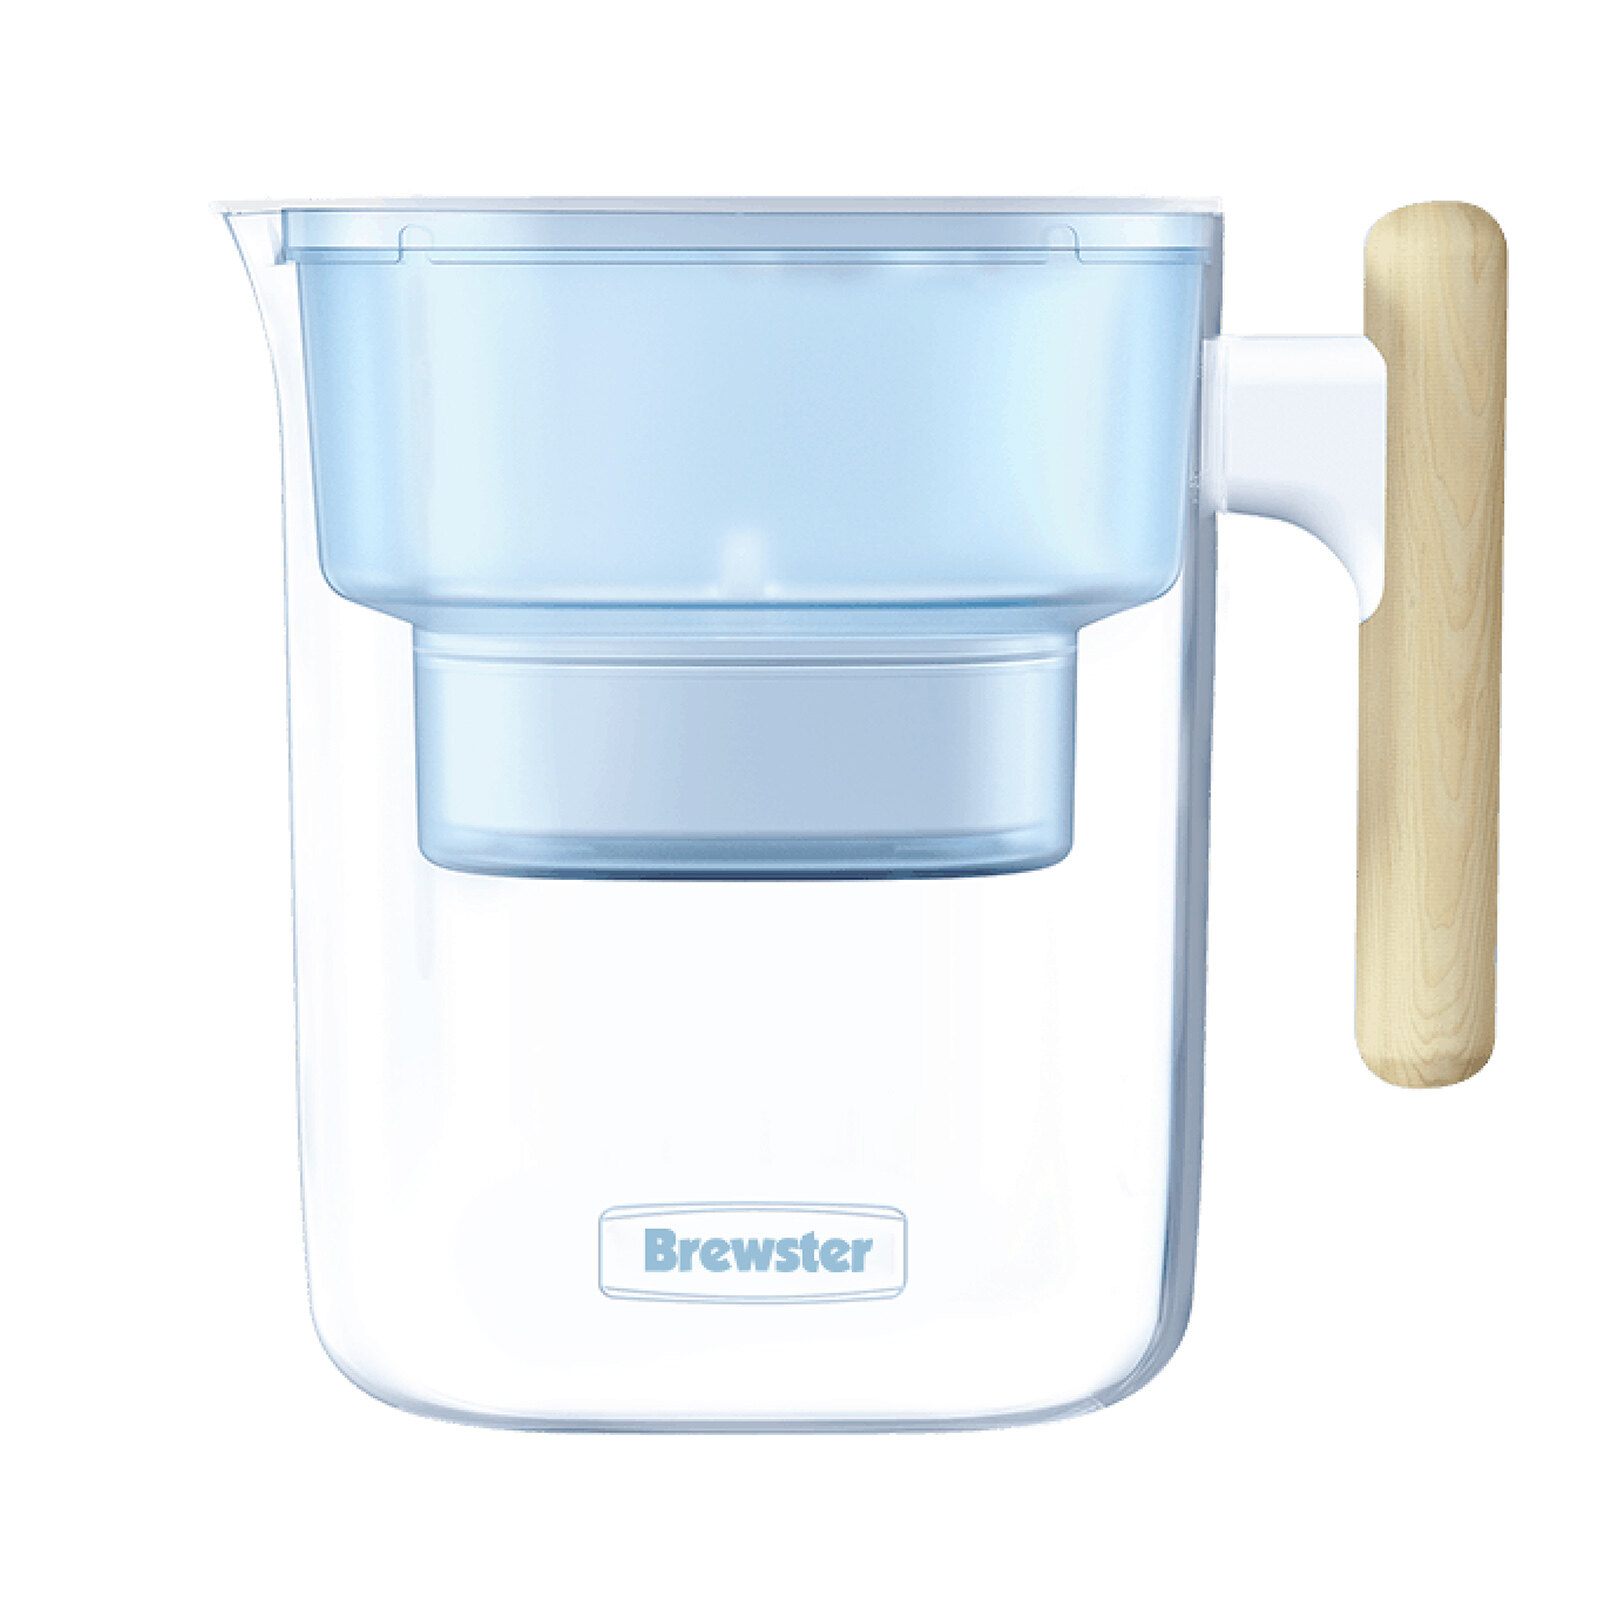 water filter supply, water filter wholesale distributor, water filter manufacturer, water filter manufacturers, water filter china